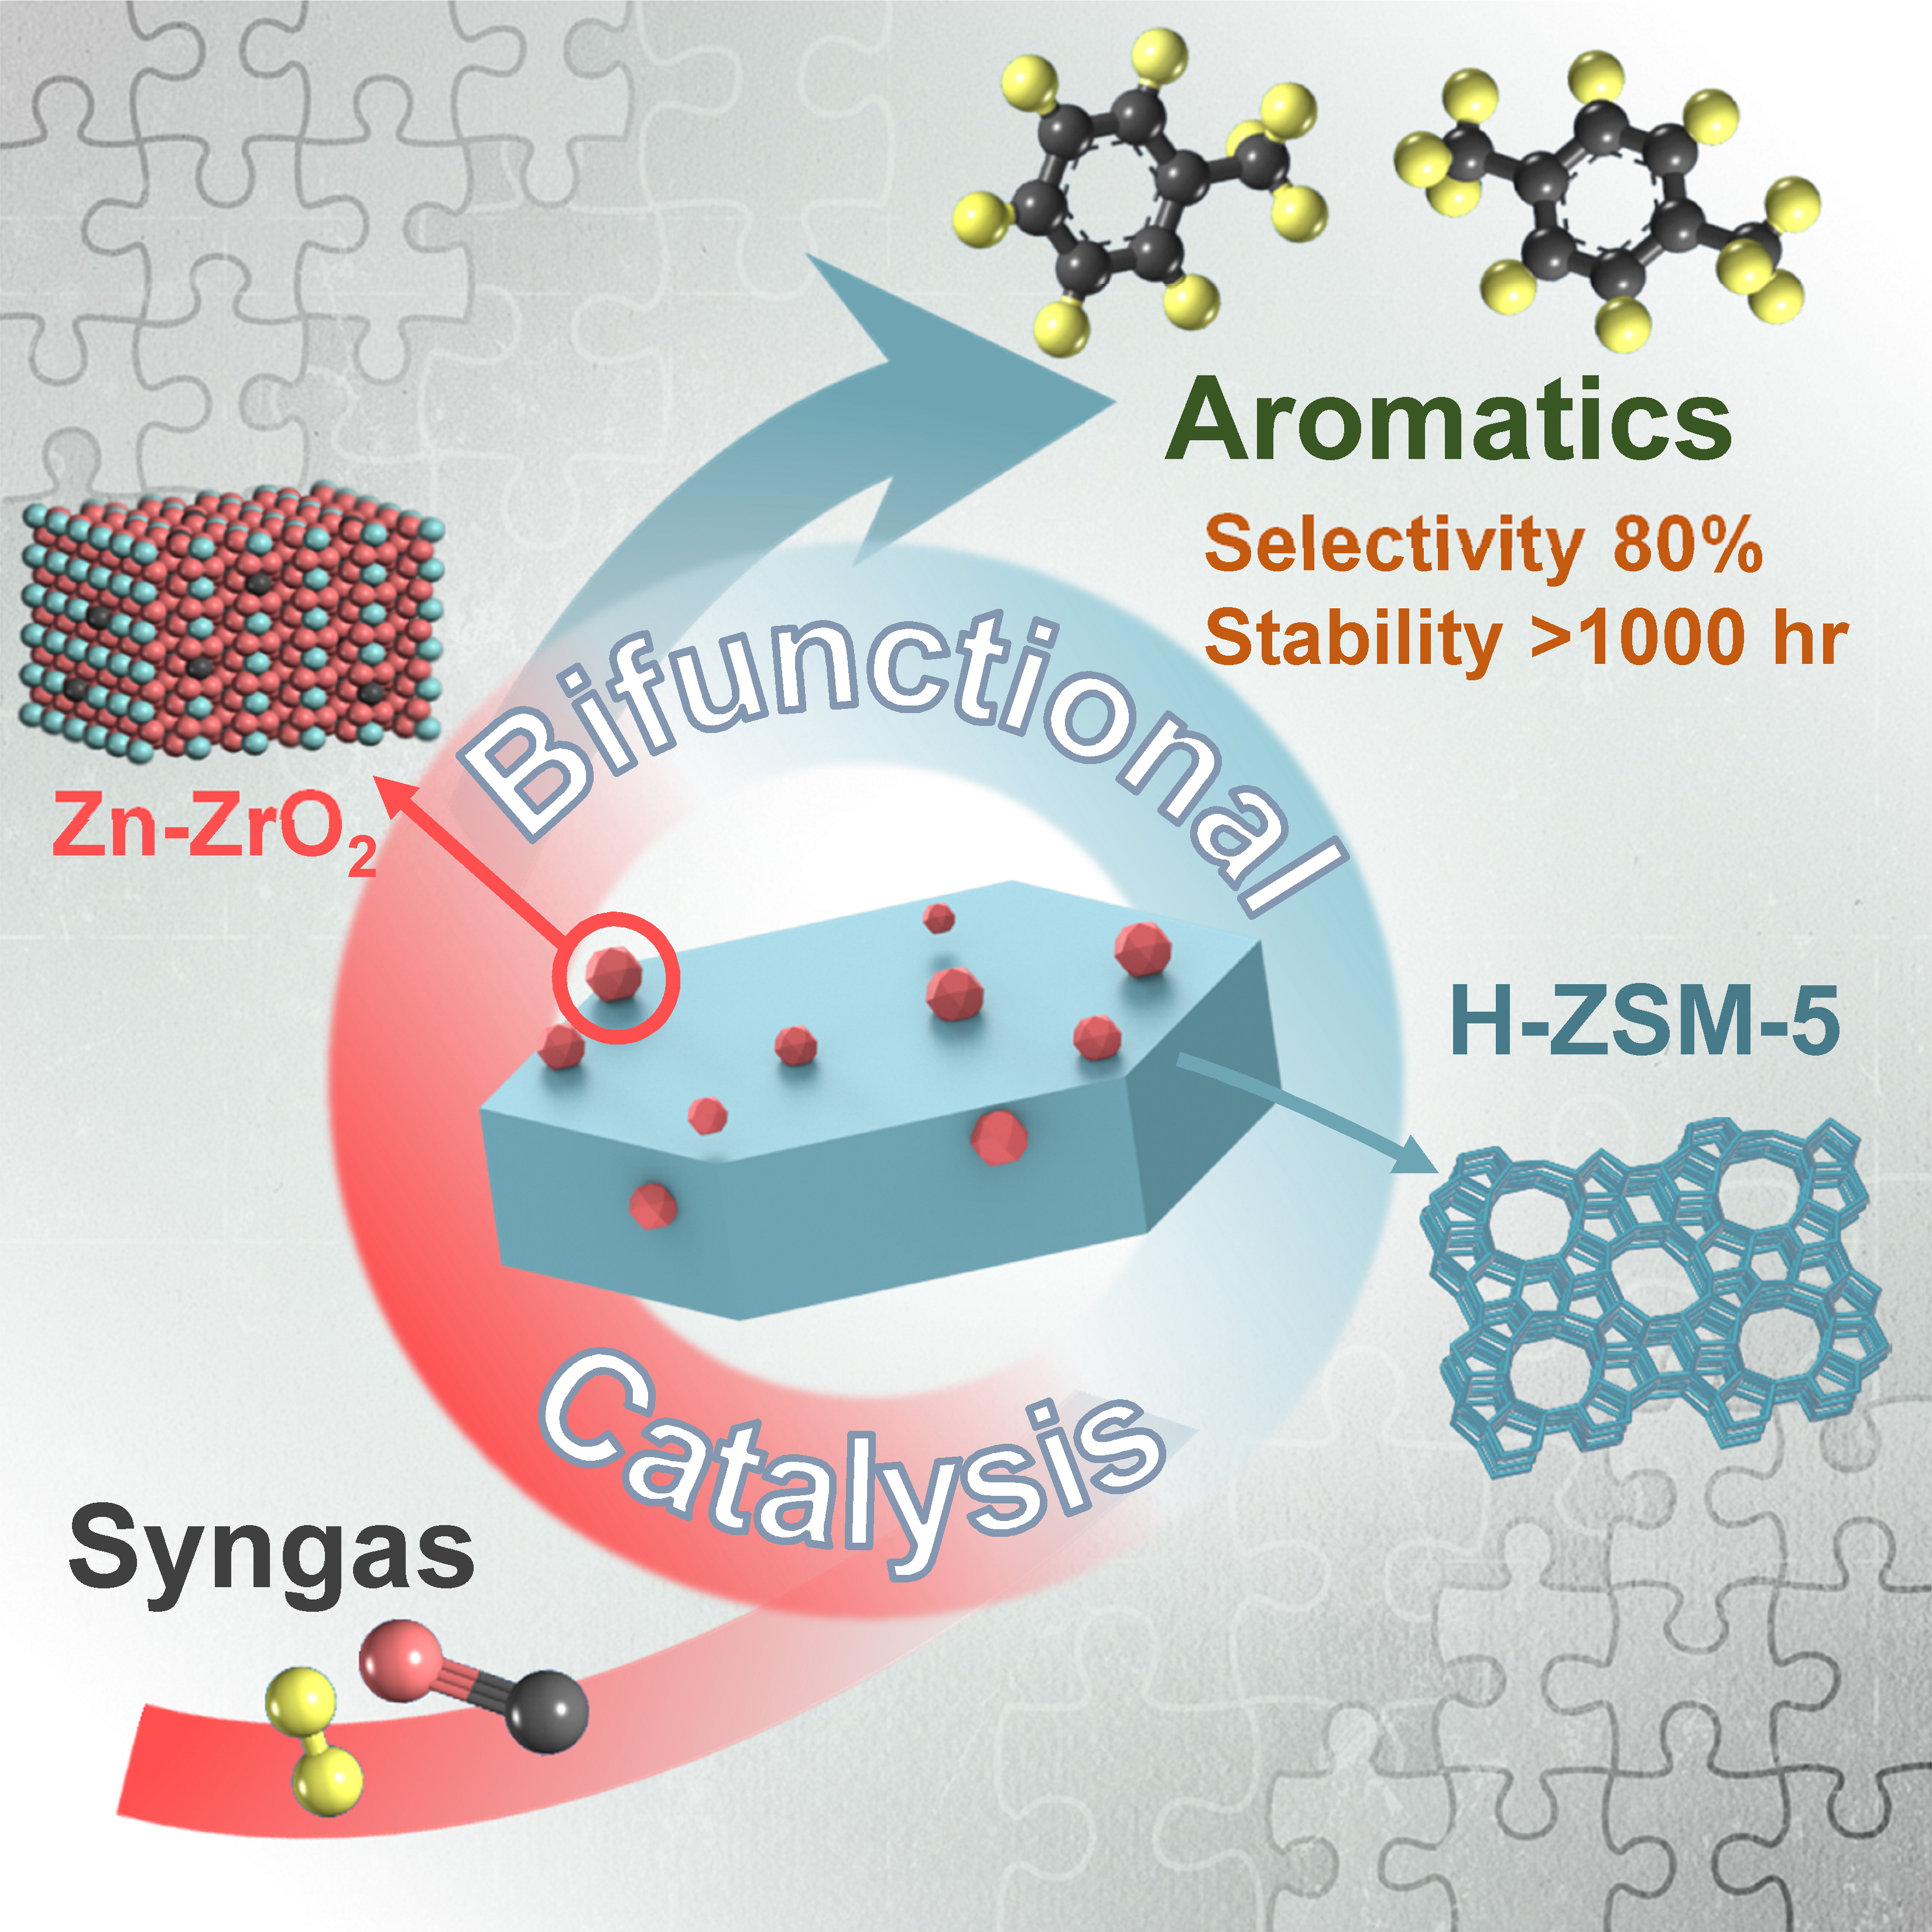 Bifunctional Catalysts for One-Step Conversion of Syngas into Aromatics with Excellent Selectivity and Stability